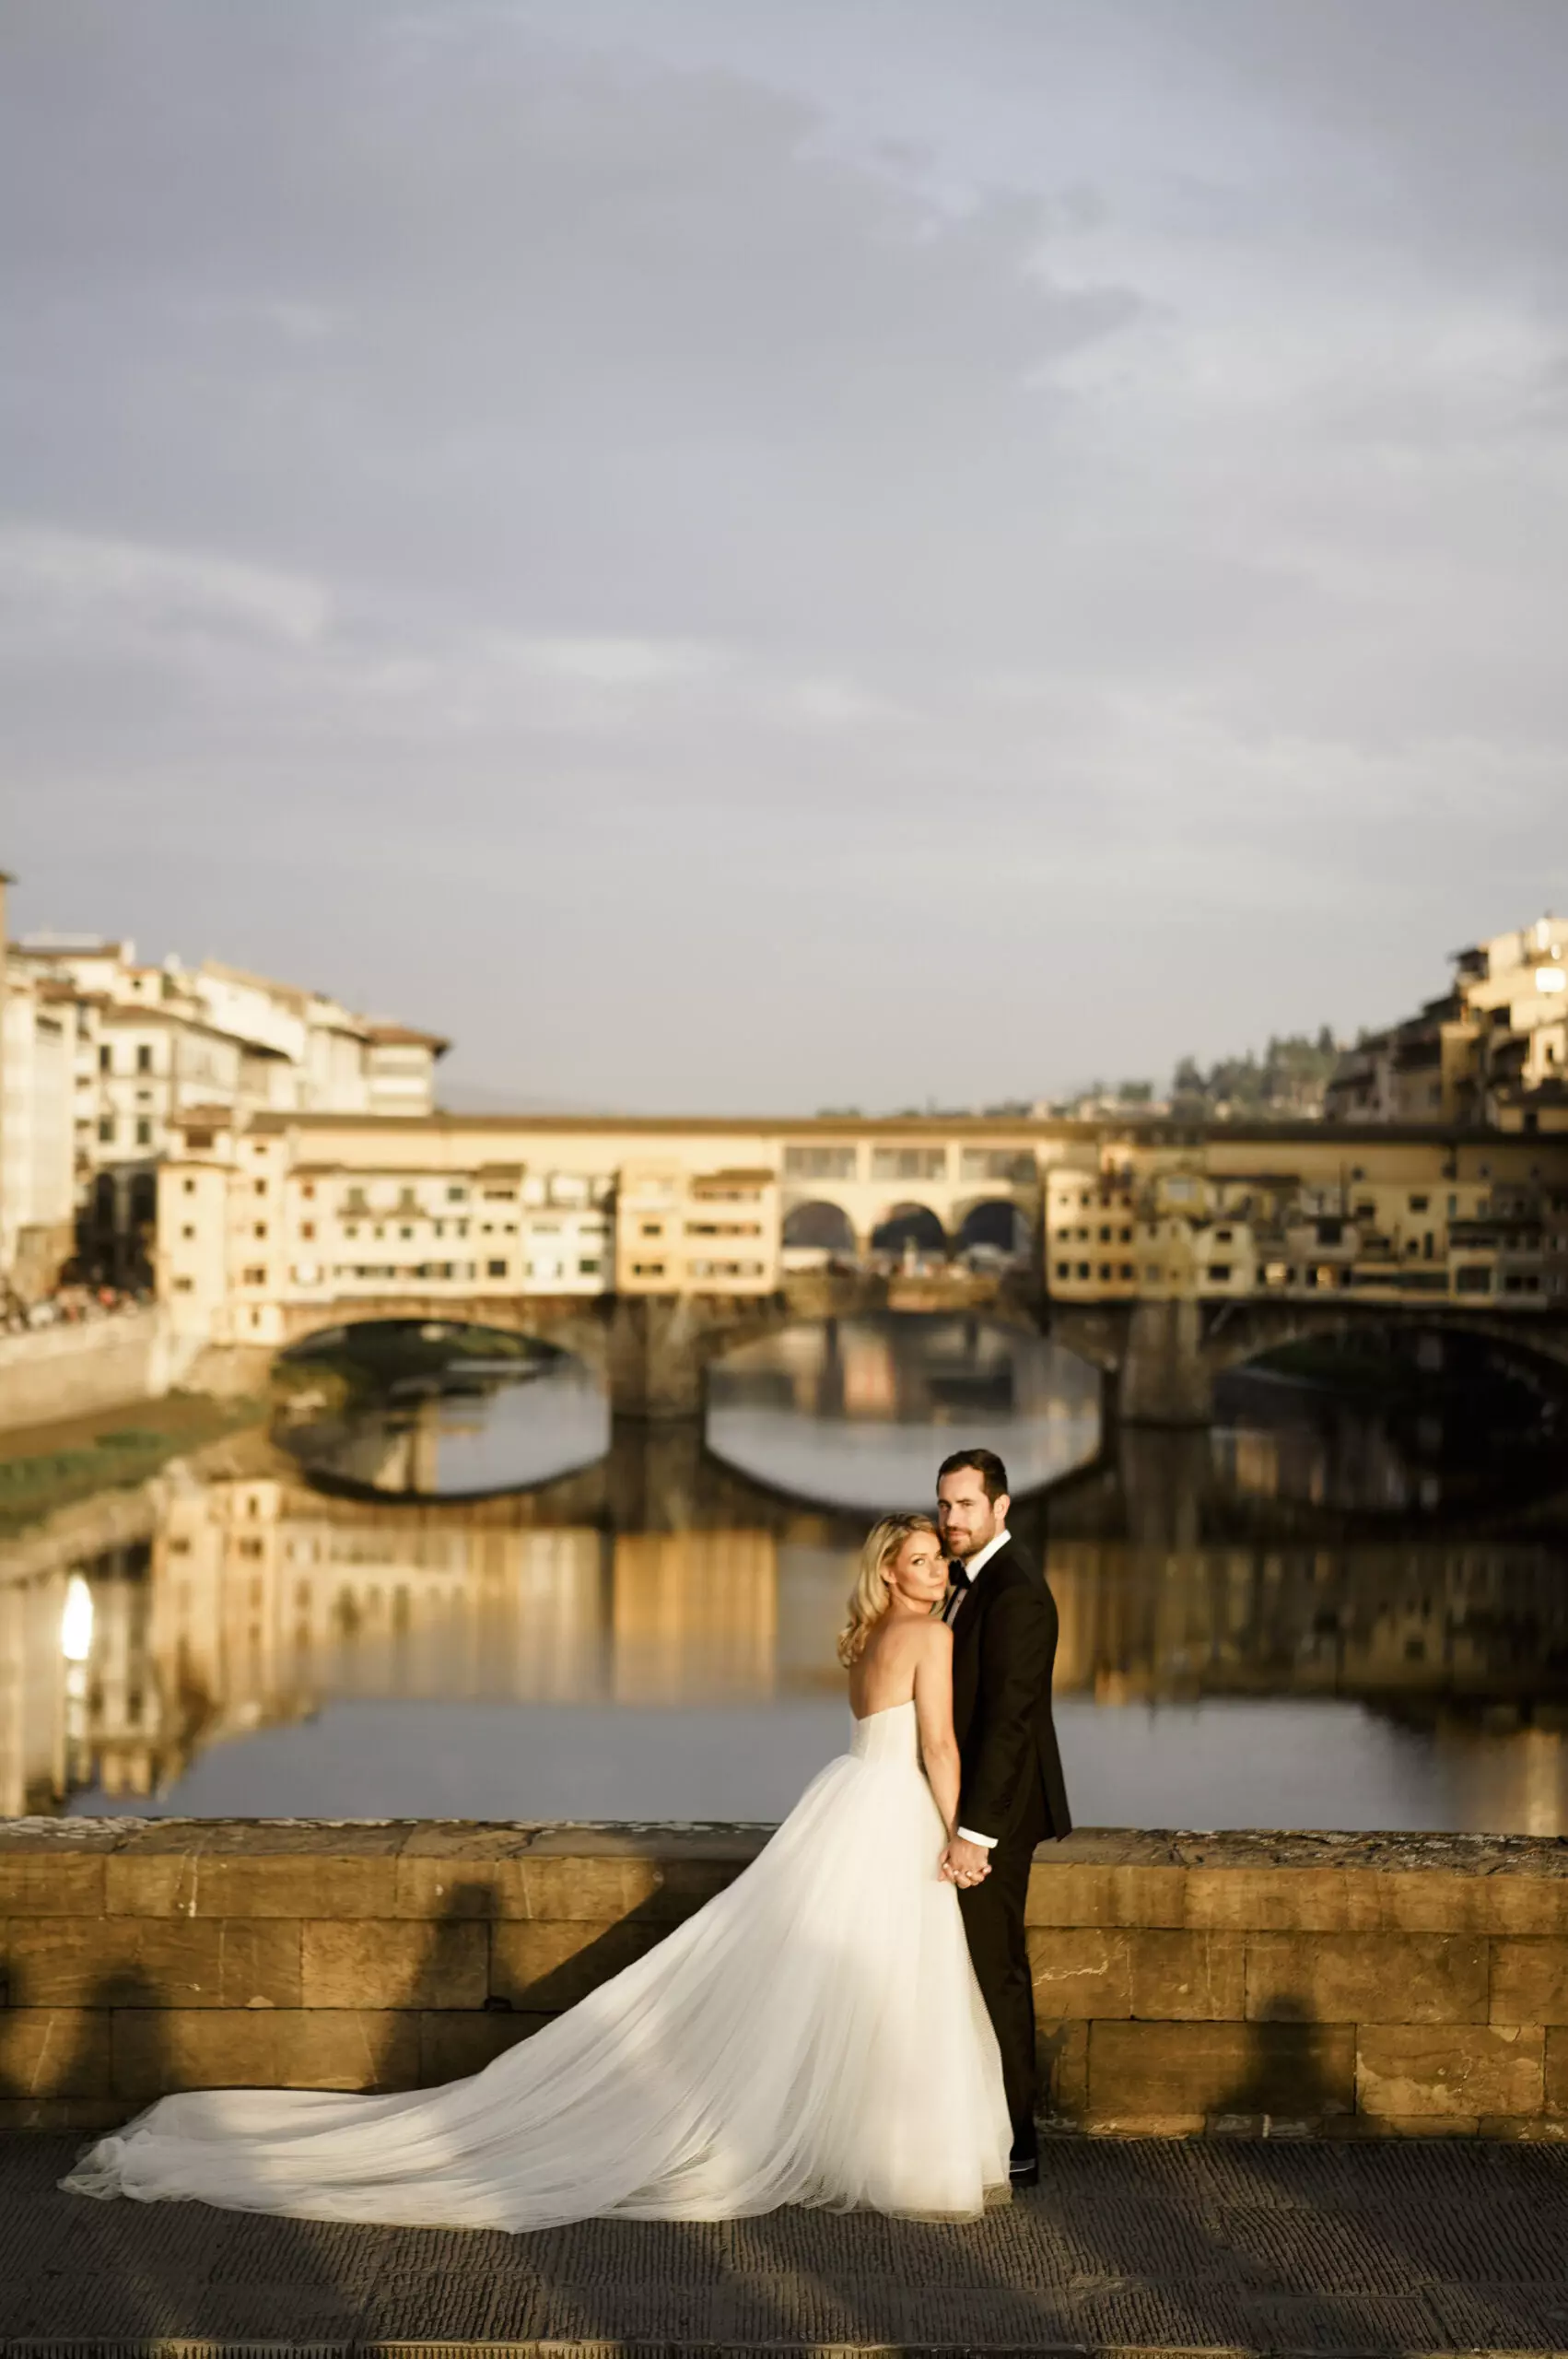 The Stylish Bride wedding day dressers, stylists. Wedding in Florence, Italy